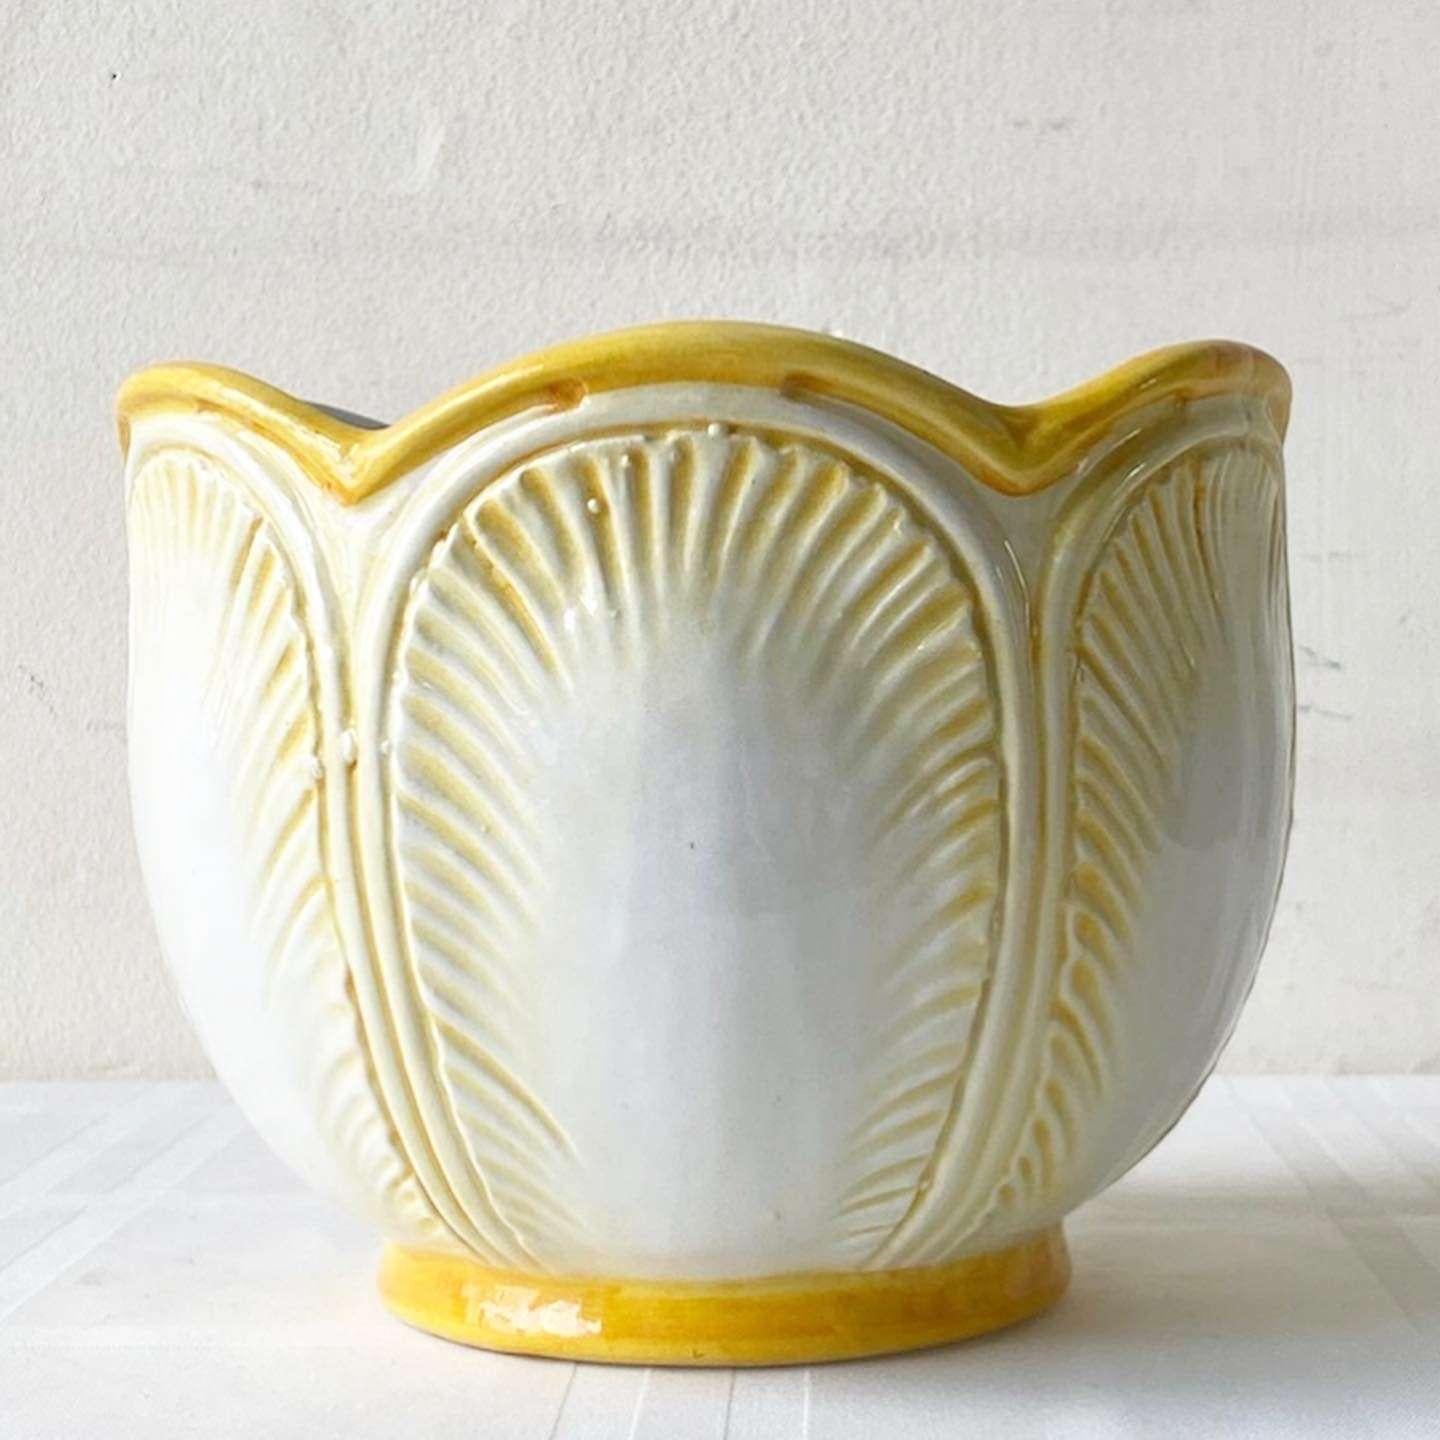 Incredible vintage Italian ceramic planter. Displays a yellow and white finish with etched leaves.
